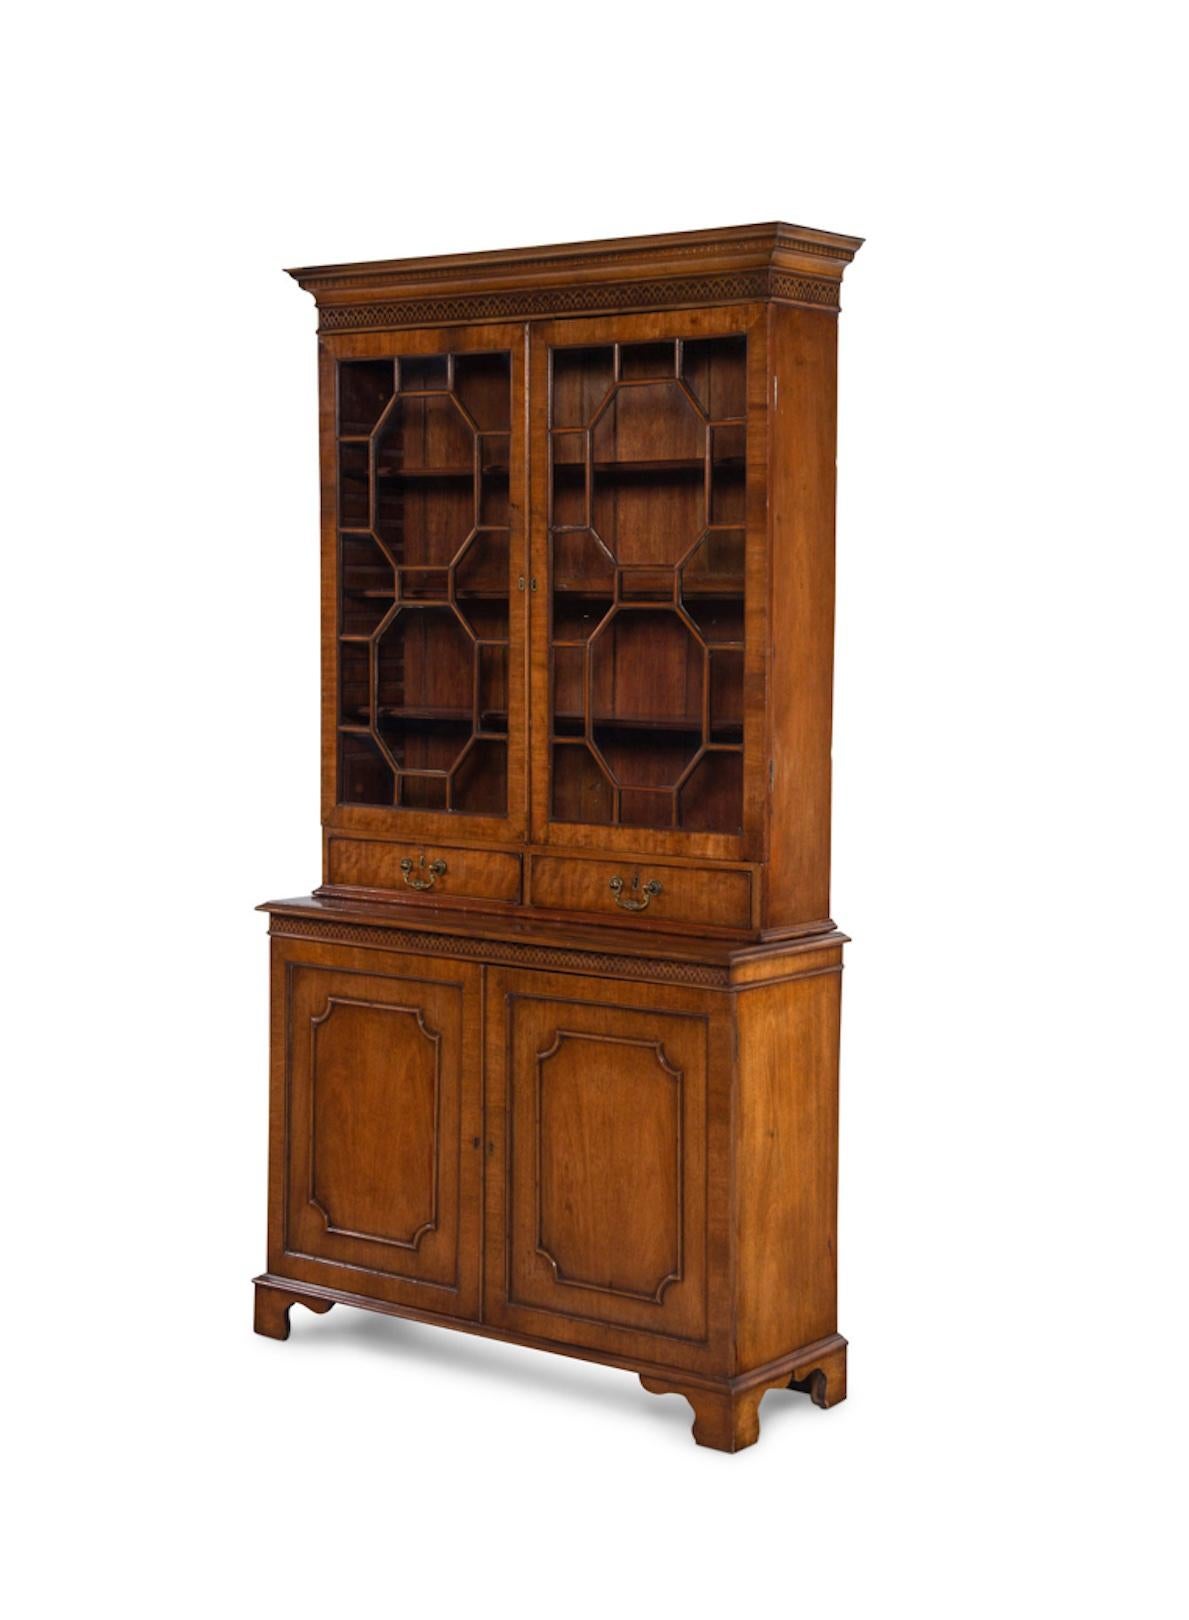 A George III Mahogany Bookcase, Two Glazed Doors Over Two Drawers Over Two Doors.  Great For Display And Storage.
19th Century
Height 83 x width 44 1/4 x depth 15 1/2 inches.